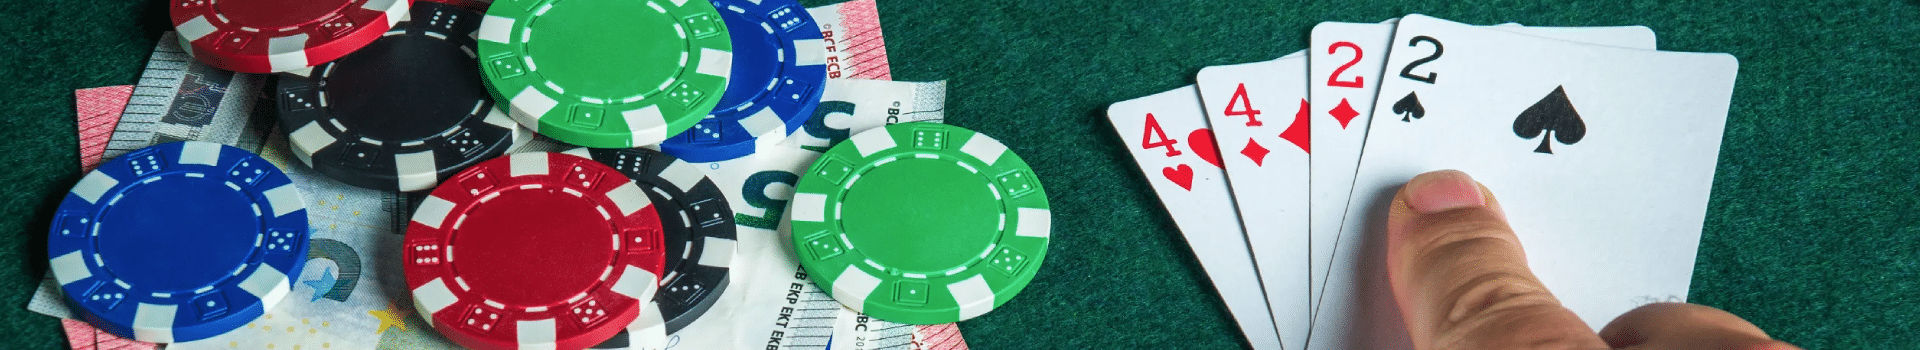 Are You Embarrassed By Your casino Skills? Here's What To Do